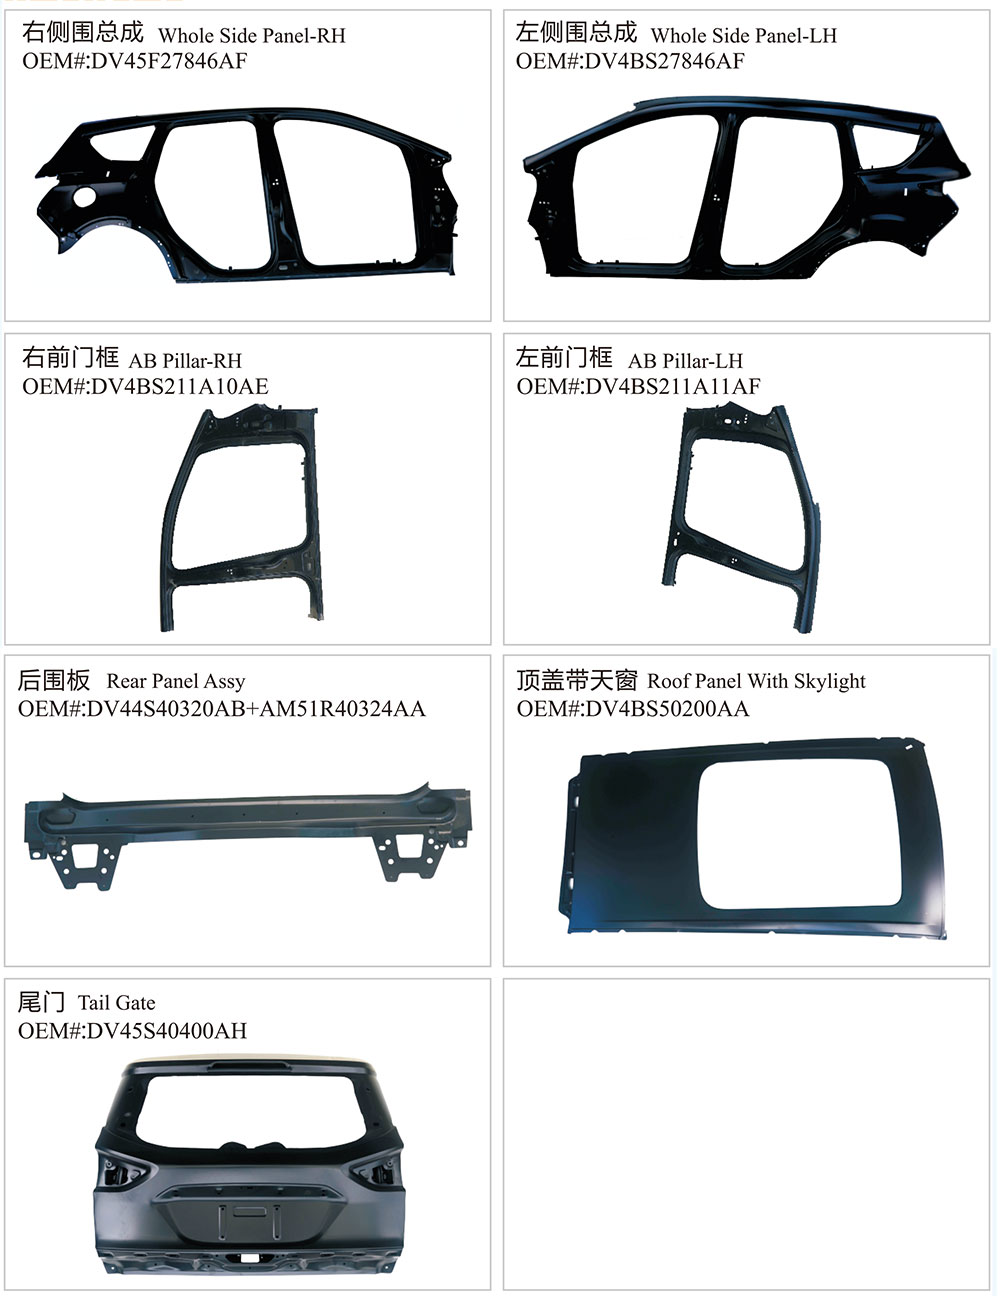 Roof Panel With Skylight for Ford Kuga / Escape 2013